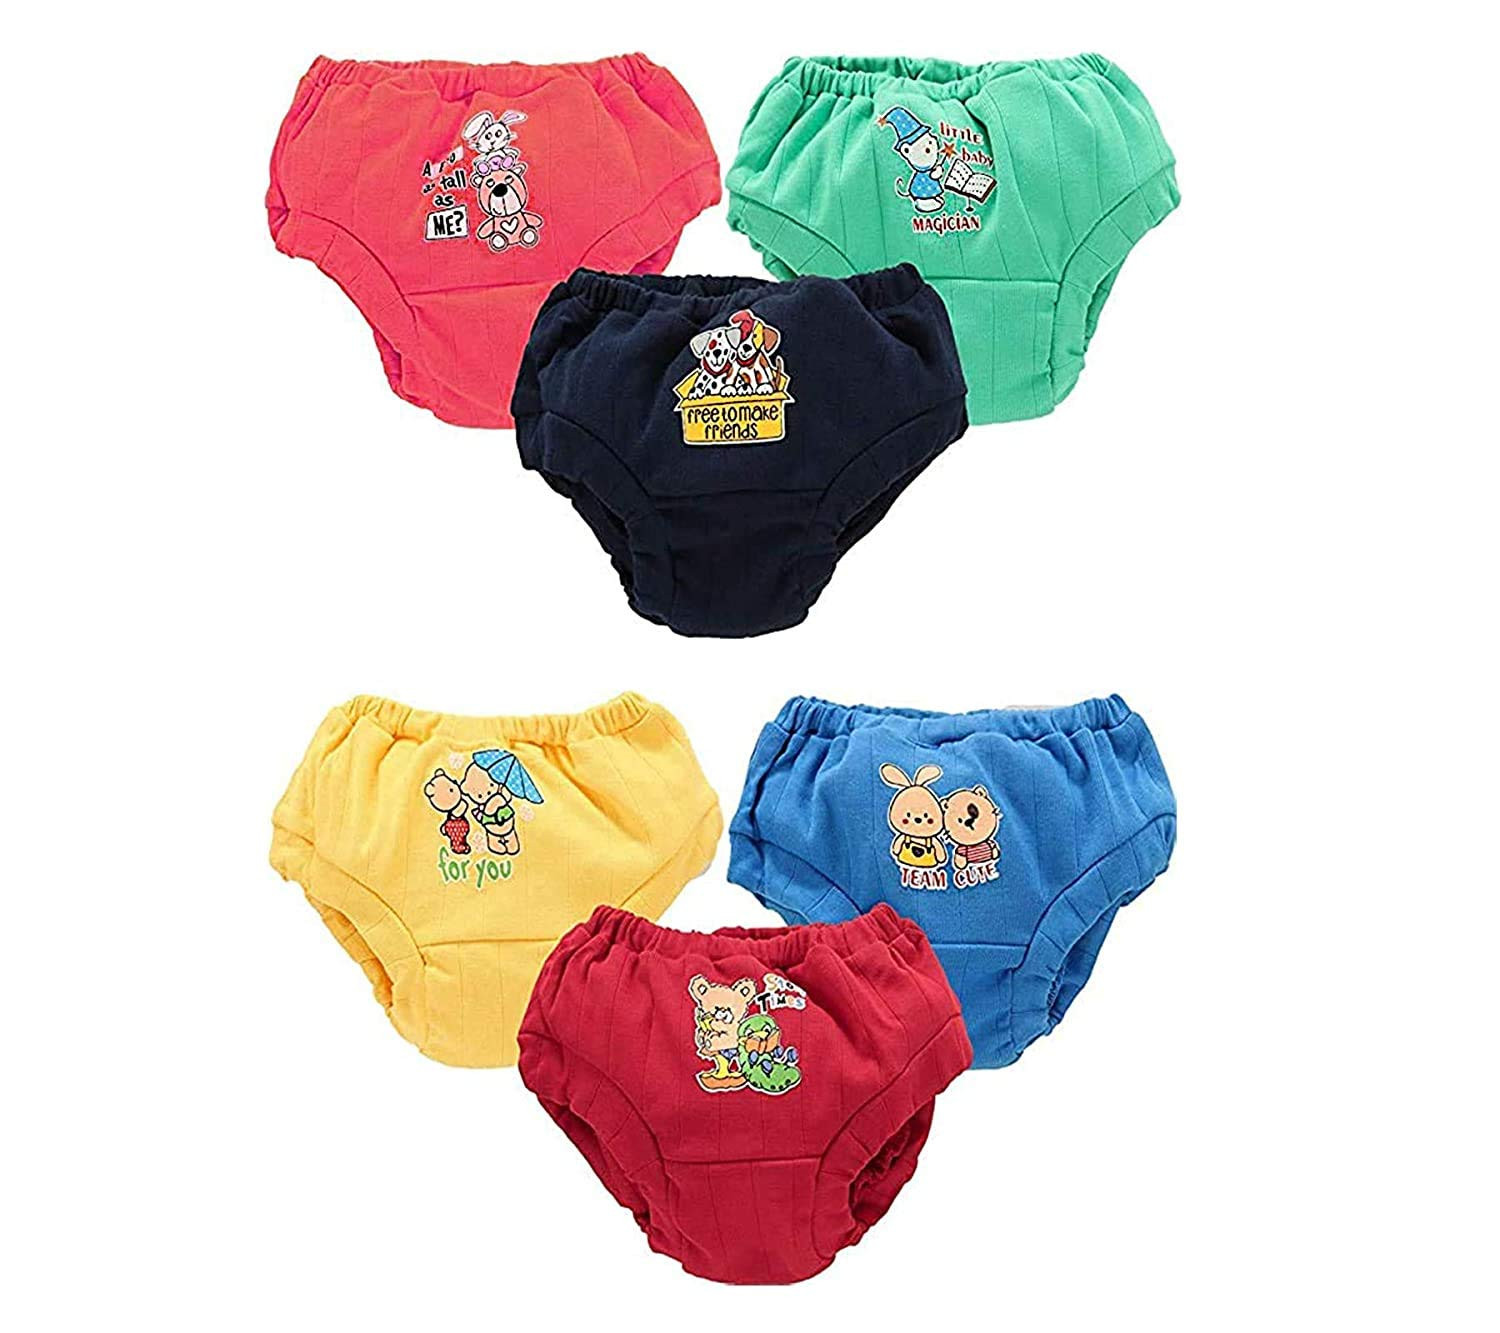 https://www.fastemi.com/uploads/fastemicom/products/benavji-baby-boys-and-baby-girls-100-organic-cotton-underwear-bloomers--briefs--panty-multicolor-pack-of-6-18-24-months-multicoloured-3-287033504028398_l.jpg